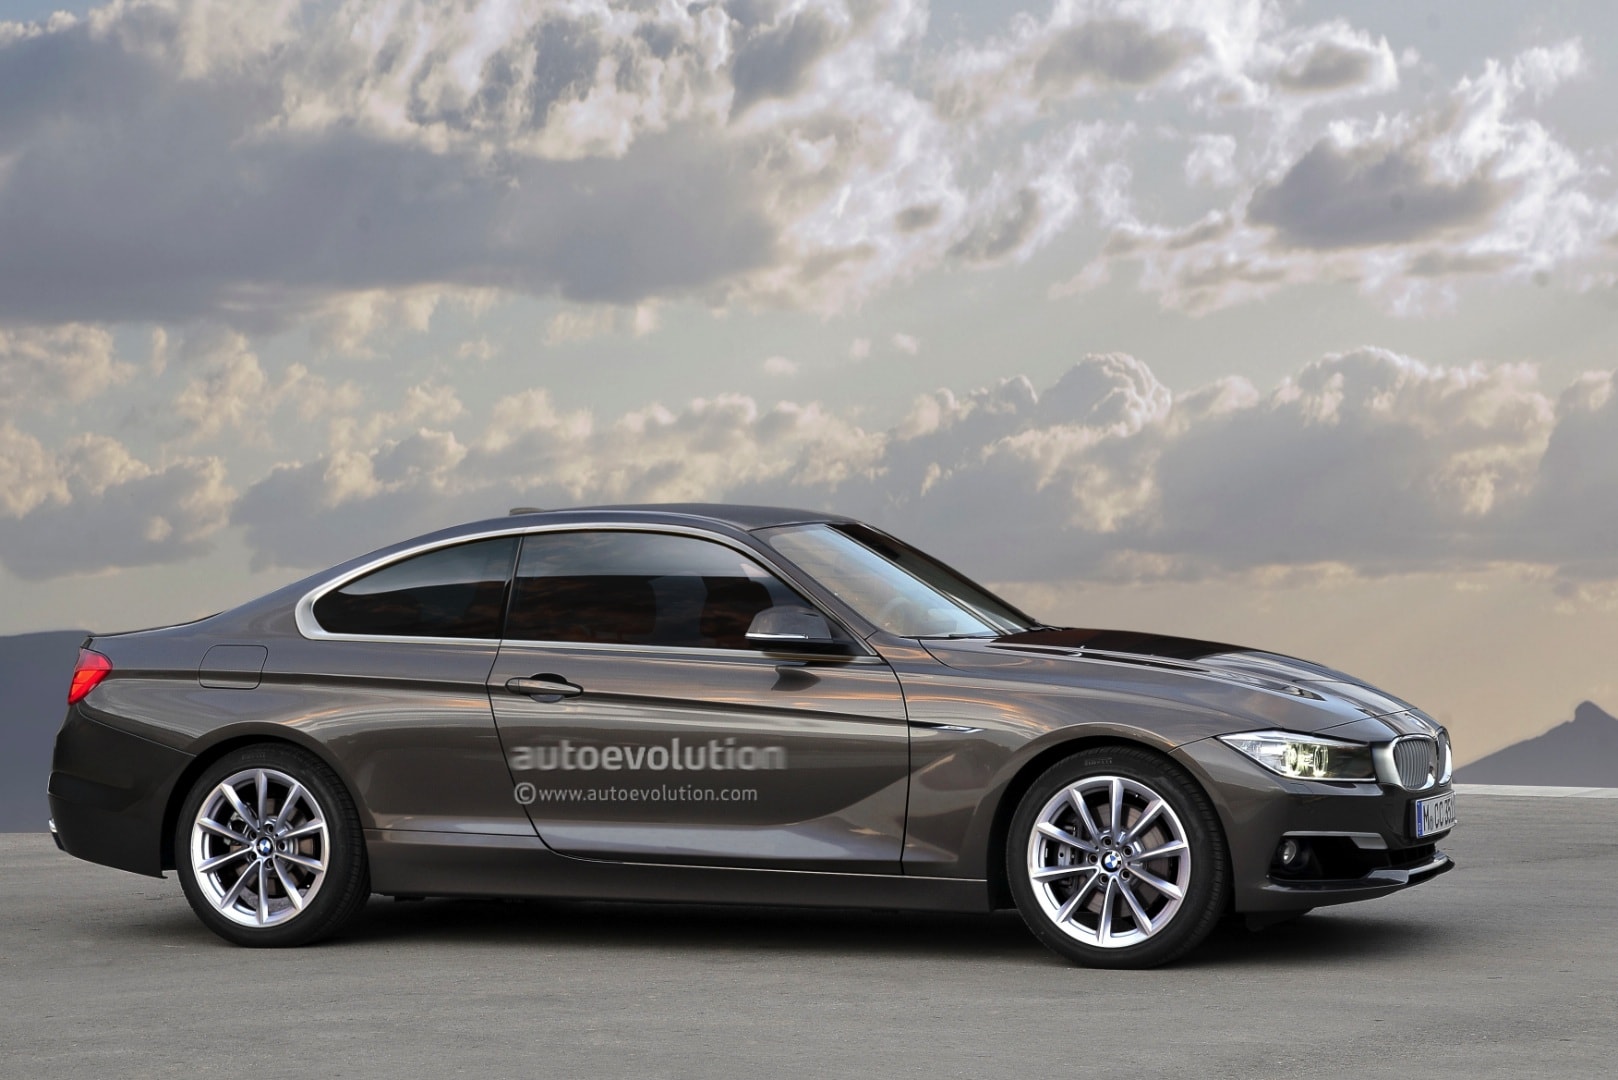 2013 F32 BMW 4-Series Coupe Rendering - autoevolution